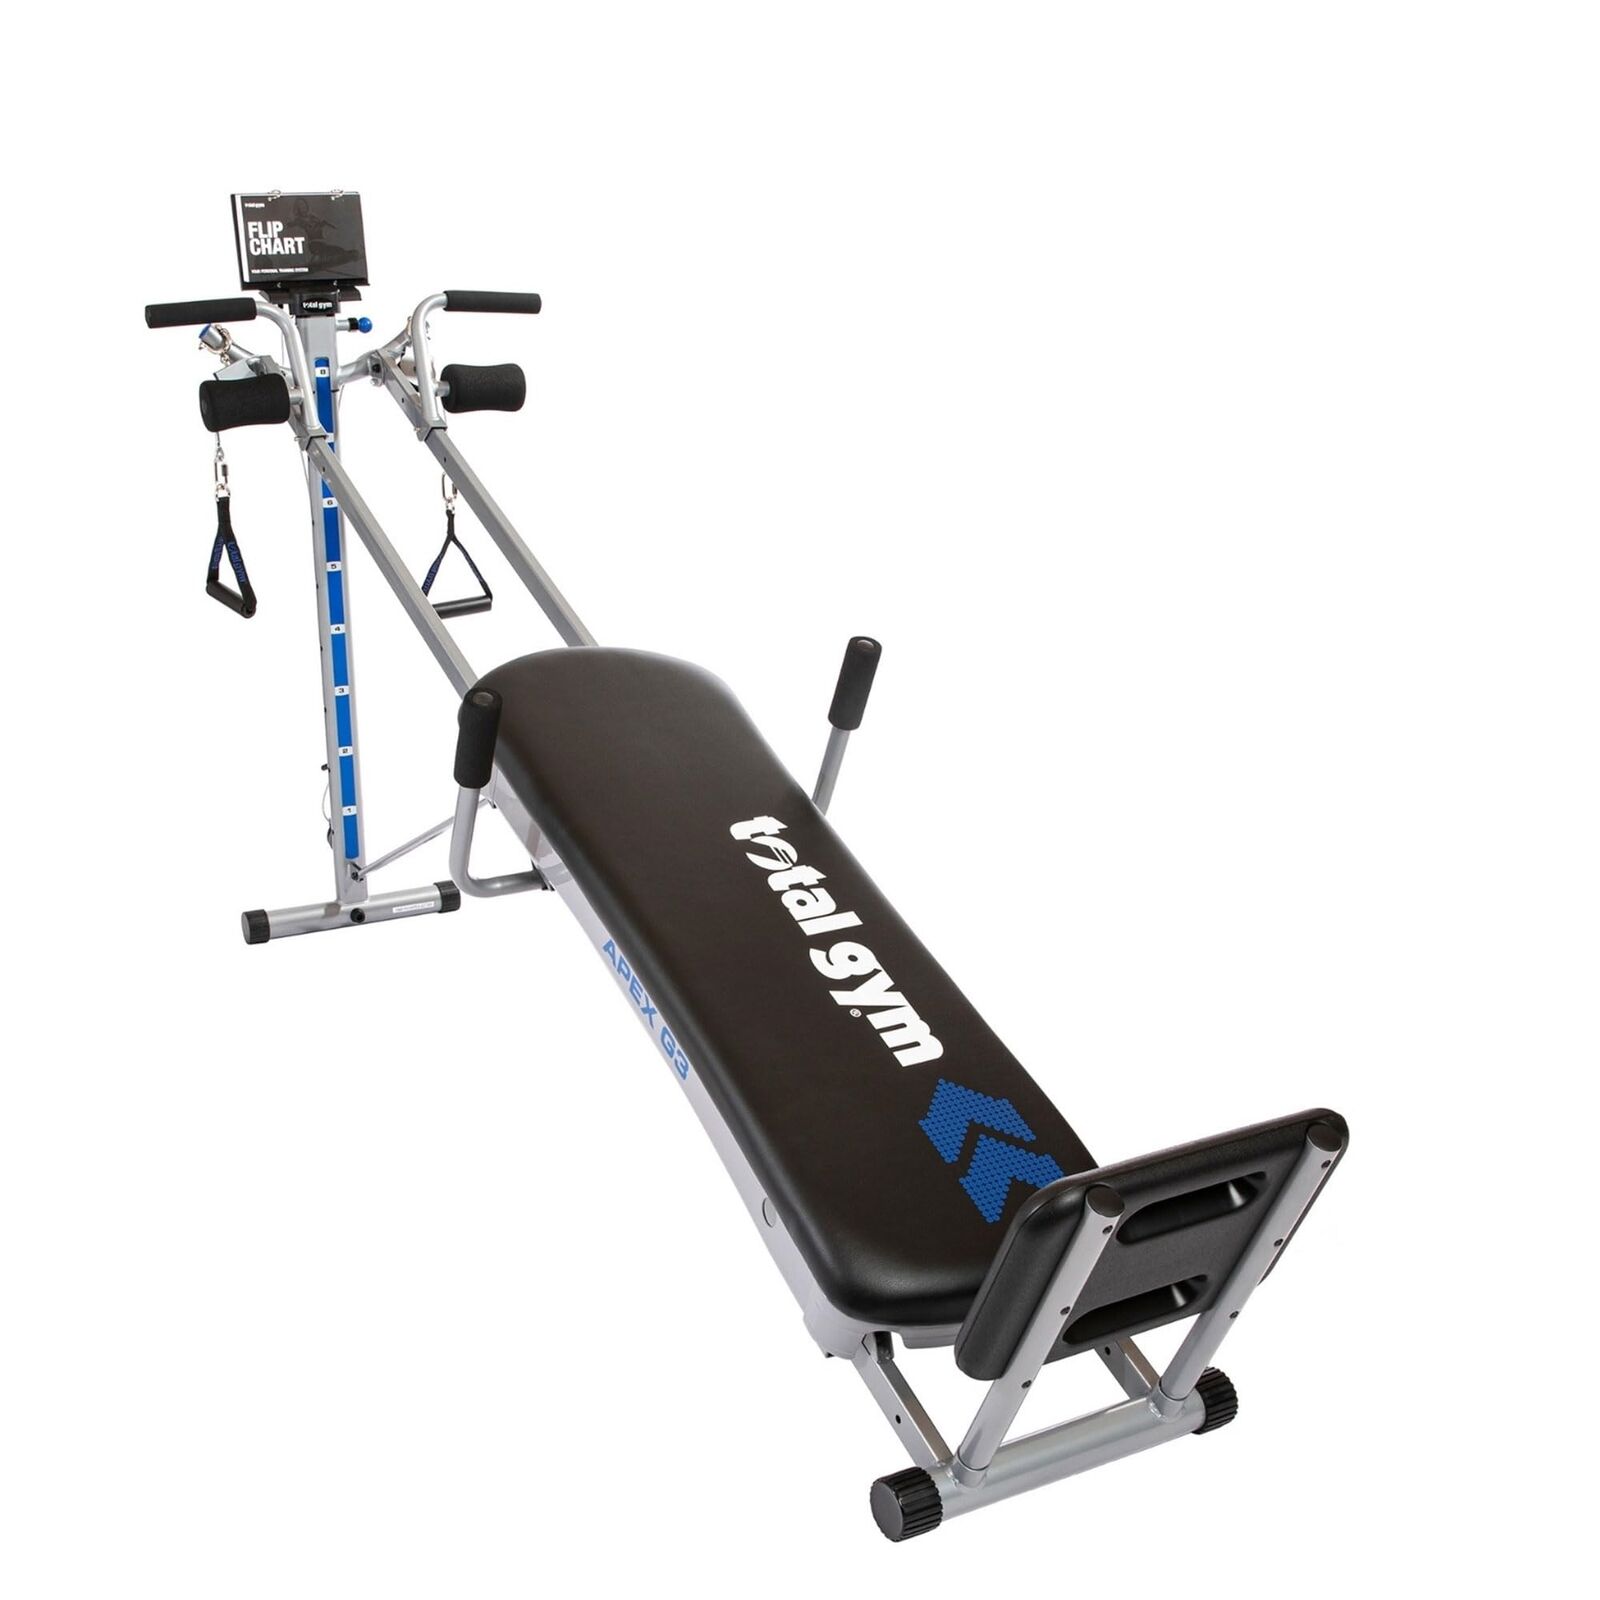 Total Gym APEX G3 Home Fitness Incline Weight Trainer $242.40 + Free Shipping